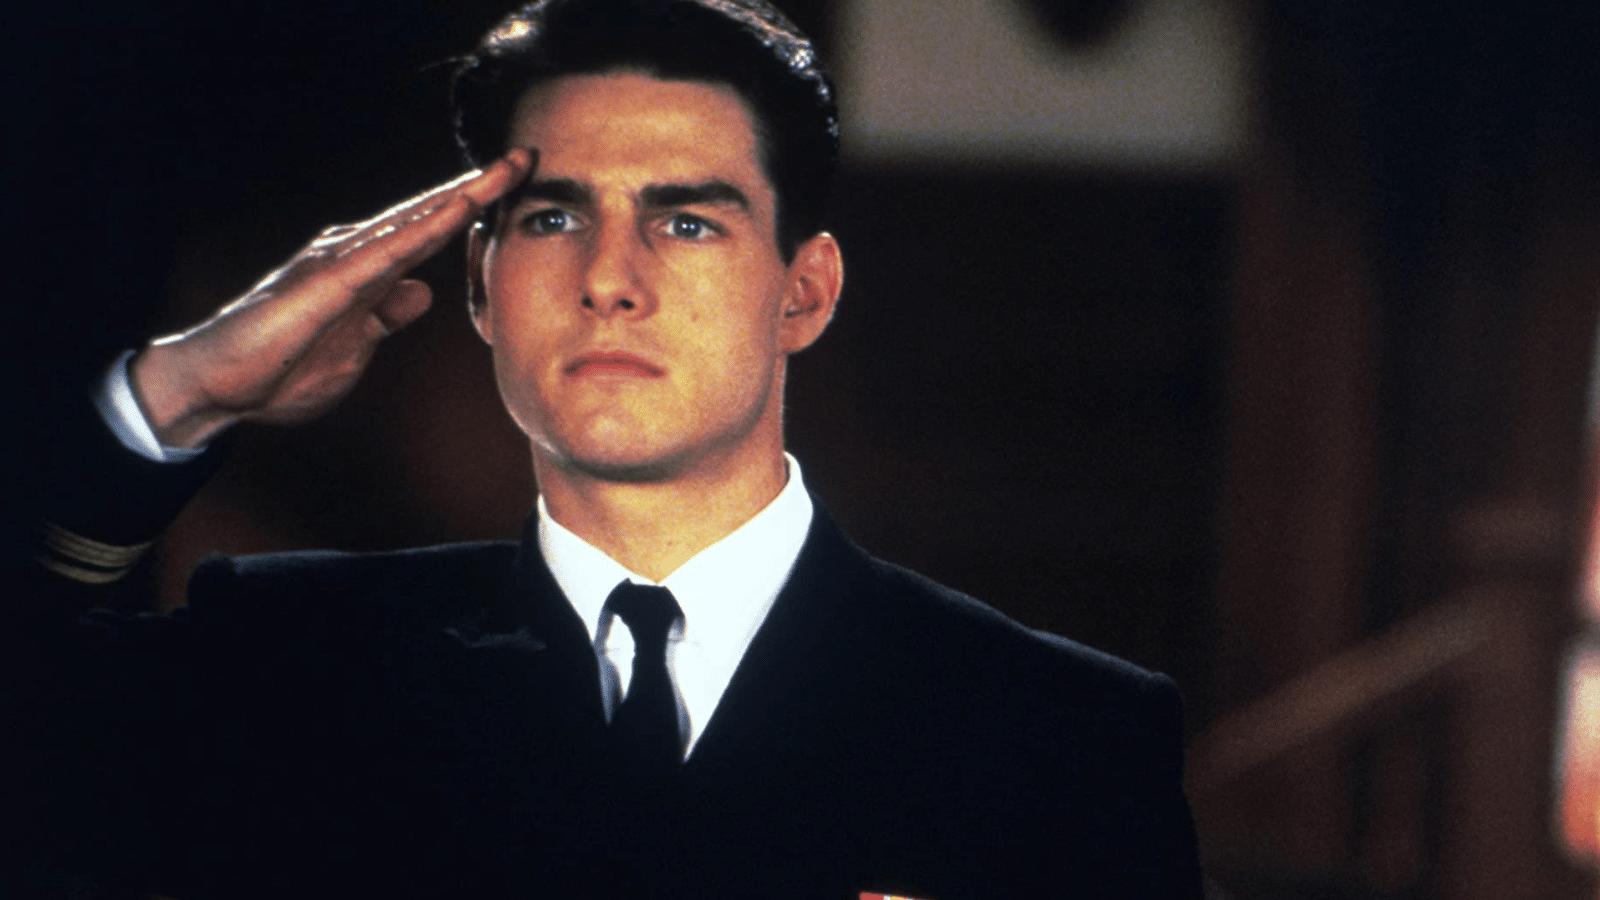 <p><span>There aren’t many actors as universally recognized as Tom Cruise. For the past four decades, the award-winning Cruise has appeared in many large-scale films throughout his career. </span></p> <p><span>Starting in teen dramas and comedies, the young actor made a name for himself thanks to successful films like </span><i><span>The Outsiders</span></i><span> and</span><i><span> Risky Business</span></i><span> in the 1980s. By the decade’s end, he gained a foothold in the mainstream film industry, starring in highly publicized movies like </span><i><span>Rain Man</span></i><span> and </span><i><span>The Color of Money.</span></i></p> <p><span>Starting with 1986’s </span><i><span>Top Gun</span></i><span>, Cruise has held onto his place at the top of Hollywood, appearing in numerous comedies, dramas, action films, and sci-fi epics in the years that followed. To this day, he ranks as the most bankable movie star of the modern era, as seen with films like</span><i><span> Top Gun: Maverick </span></i><span>or the </span><i><span>Mission: Impossible</span></i><span> franchise.</span></p> <p><span>From some of Cruise’s most recent action movies to his earliest breakthrough roles, here are some of the greatest films to feature Tom Cruise. </span></p>